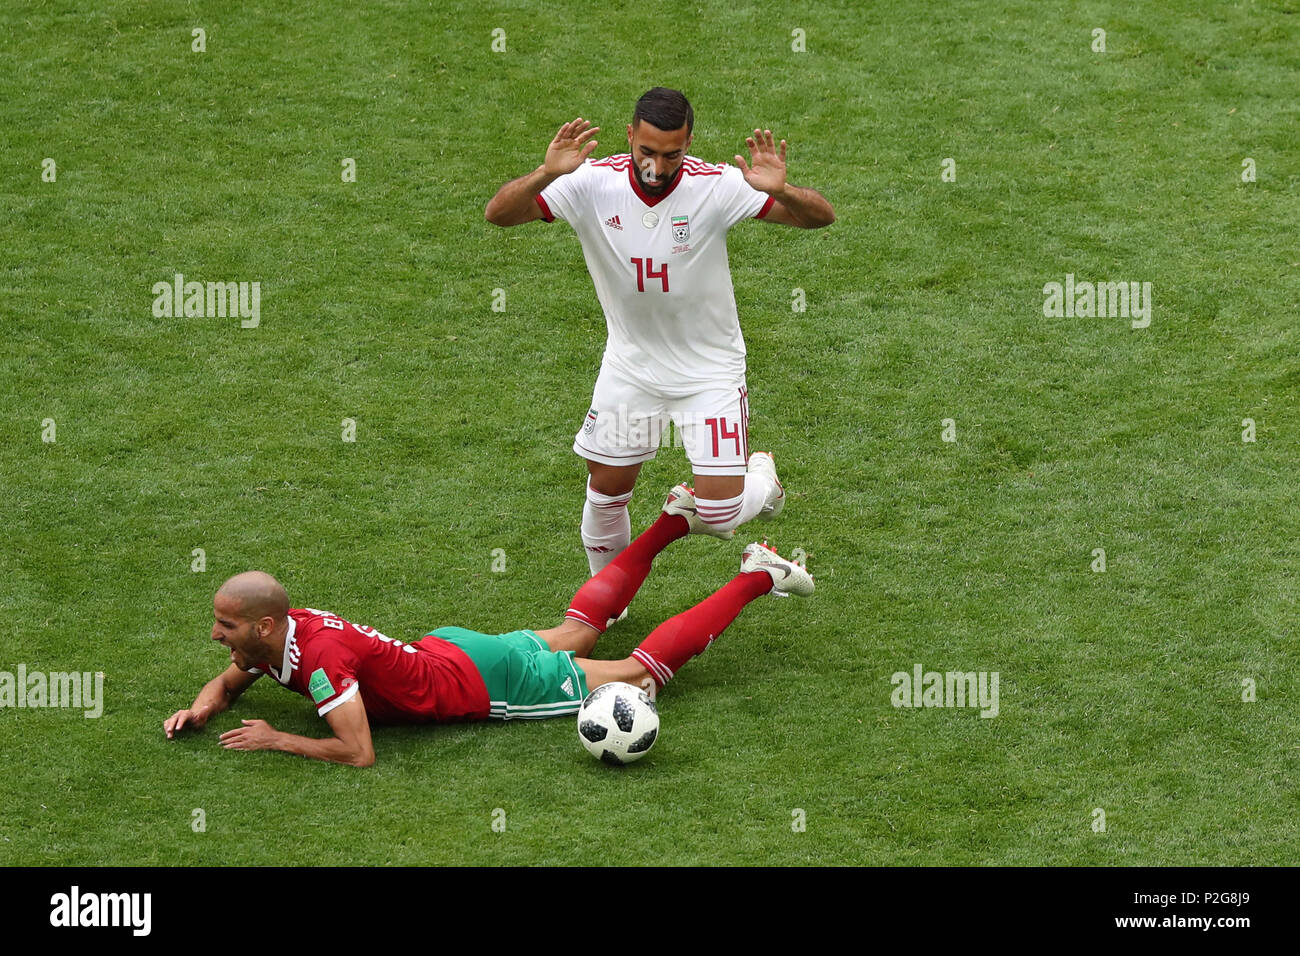 Saint Petersburg, Russia. 15th June, 2018. Iran's Saman Ghoddos (R) in action against Morocco's Morocco's Karim El Ahmadi during the FIFA World Cup 2018 Group B soccer match between Iran and Morocco at the Saint Petersburg Stadium, in Saint Petersburg, Russia, 15 June 2018. Credit: Saeid Zareian/dpa/Alamy Live News Stock Photo